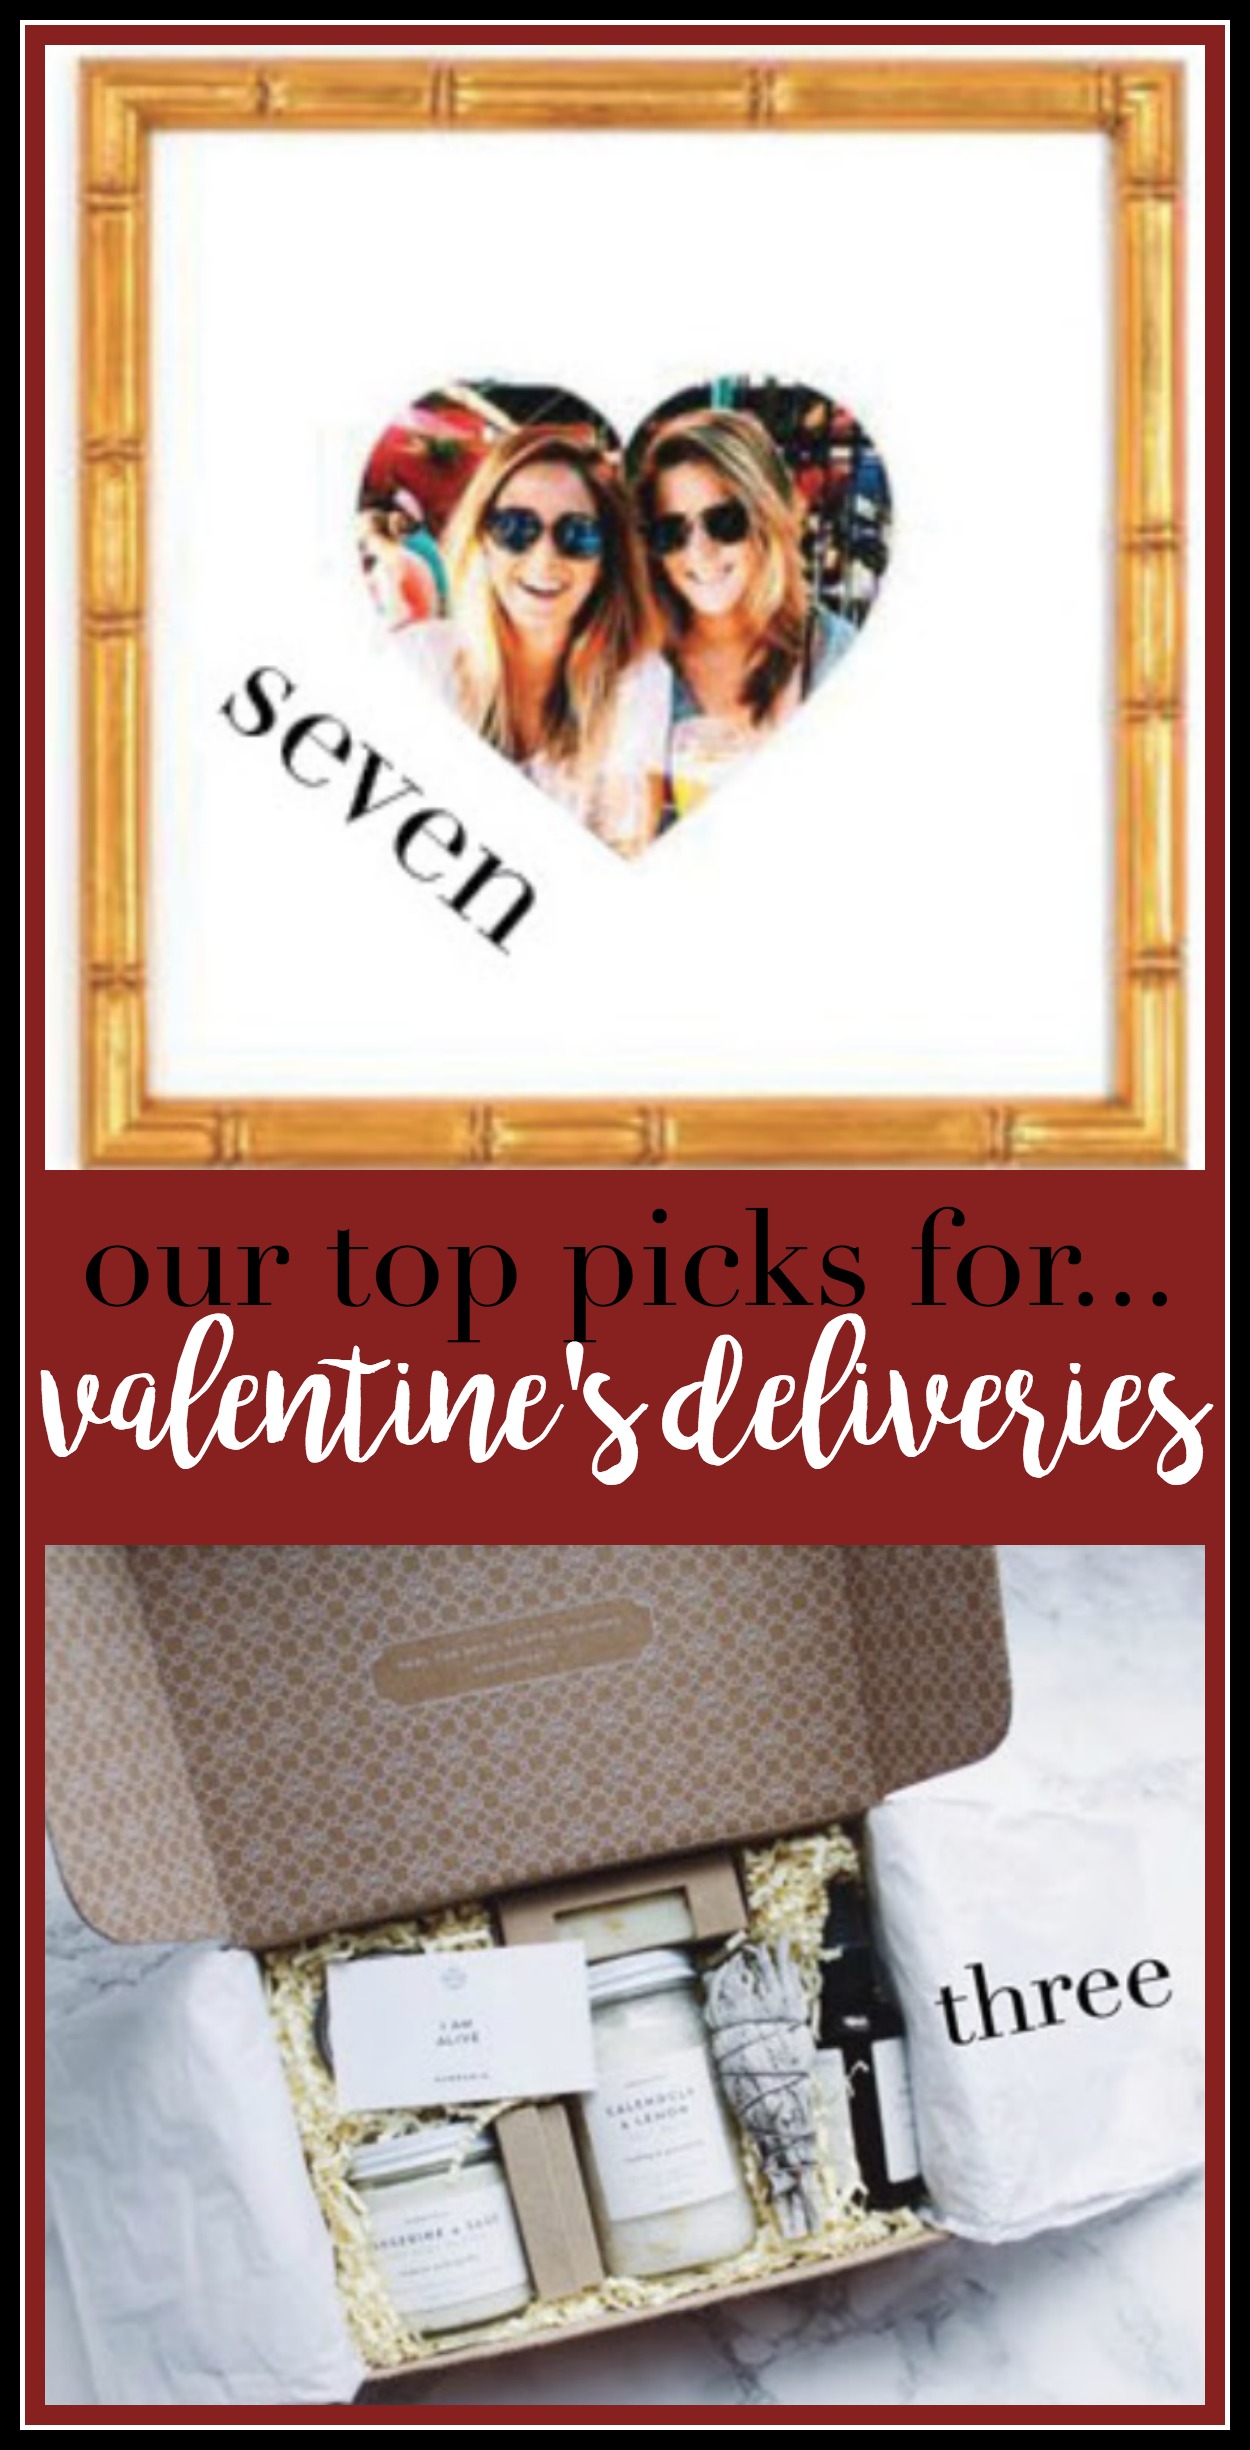 valentine's delivery services, valentine's day gifts, valentine's gift ideas, delivery services, subscription services